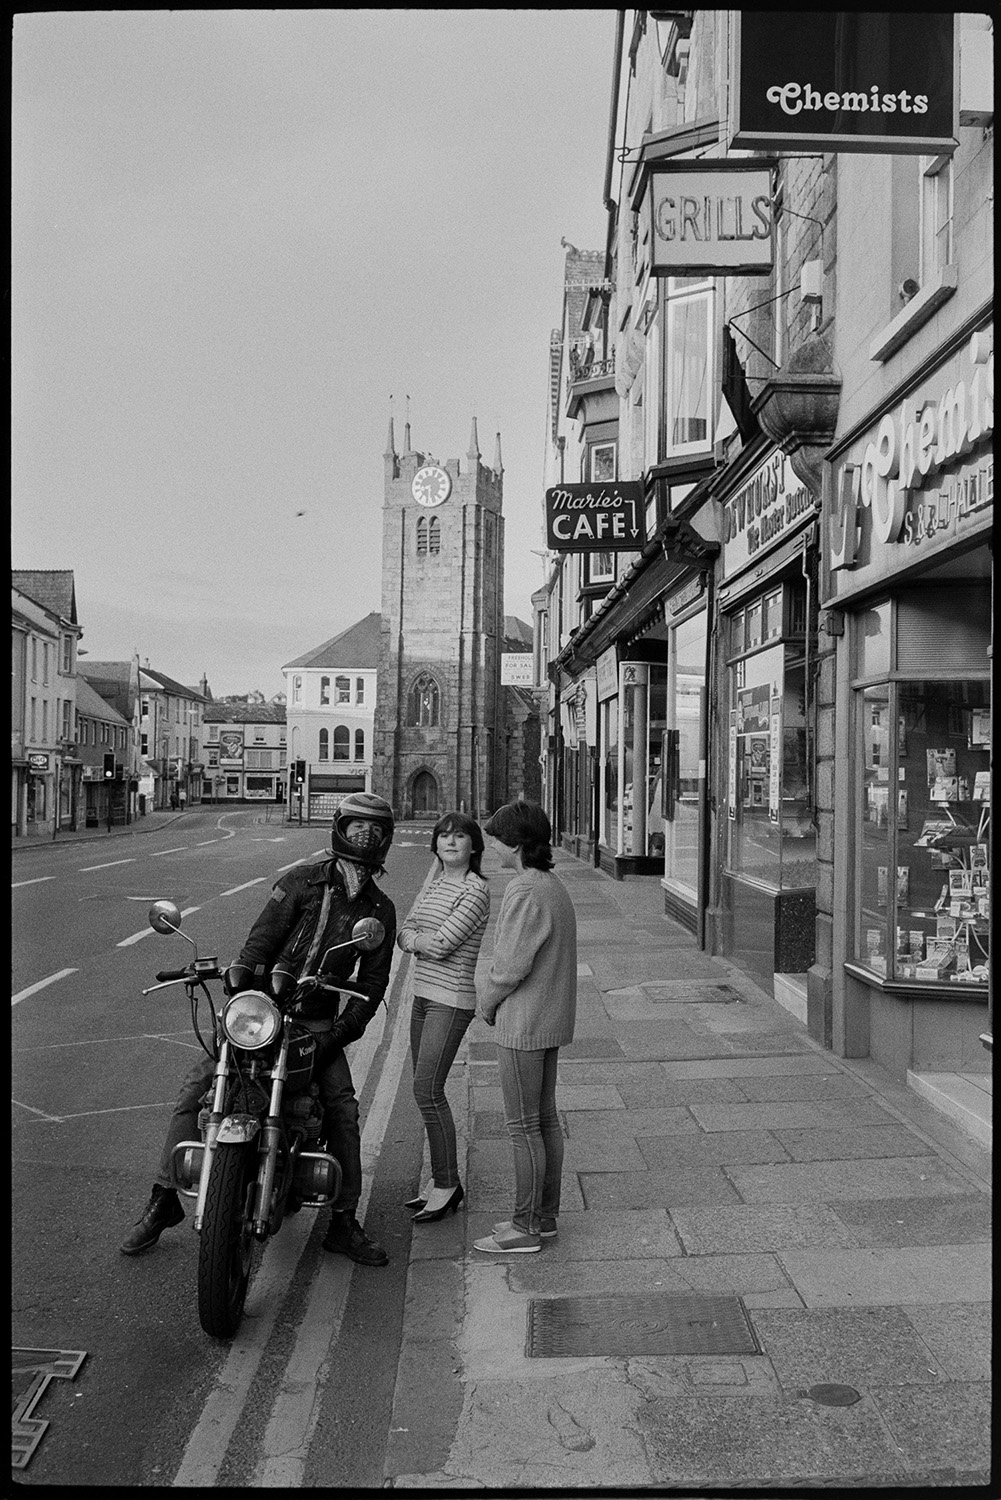 Street scenes, hotel and church tower.
[A young man seated on a motorbike talking to two young women in Fore Street, Okehampton, in front of a row of shops and cafes, including Maries' Café and a chemist. In the background the tower of St James' Church can be seen.]